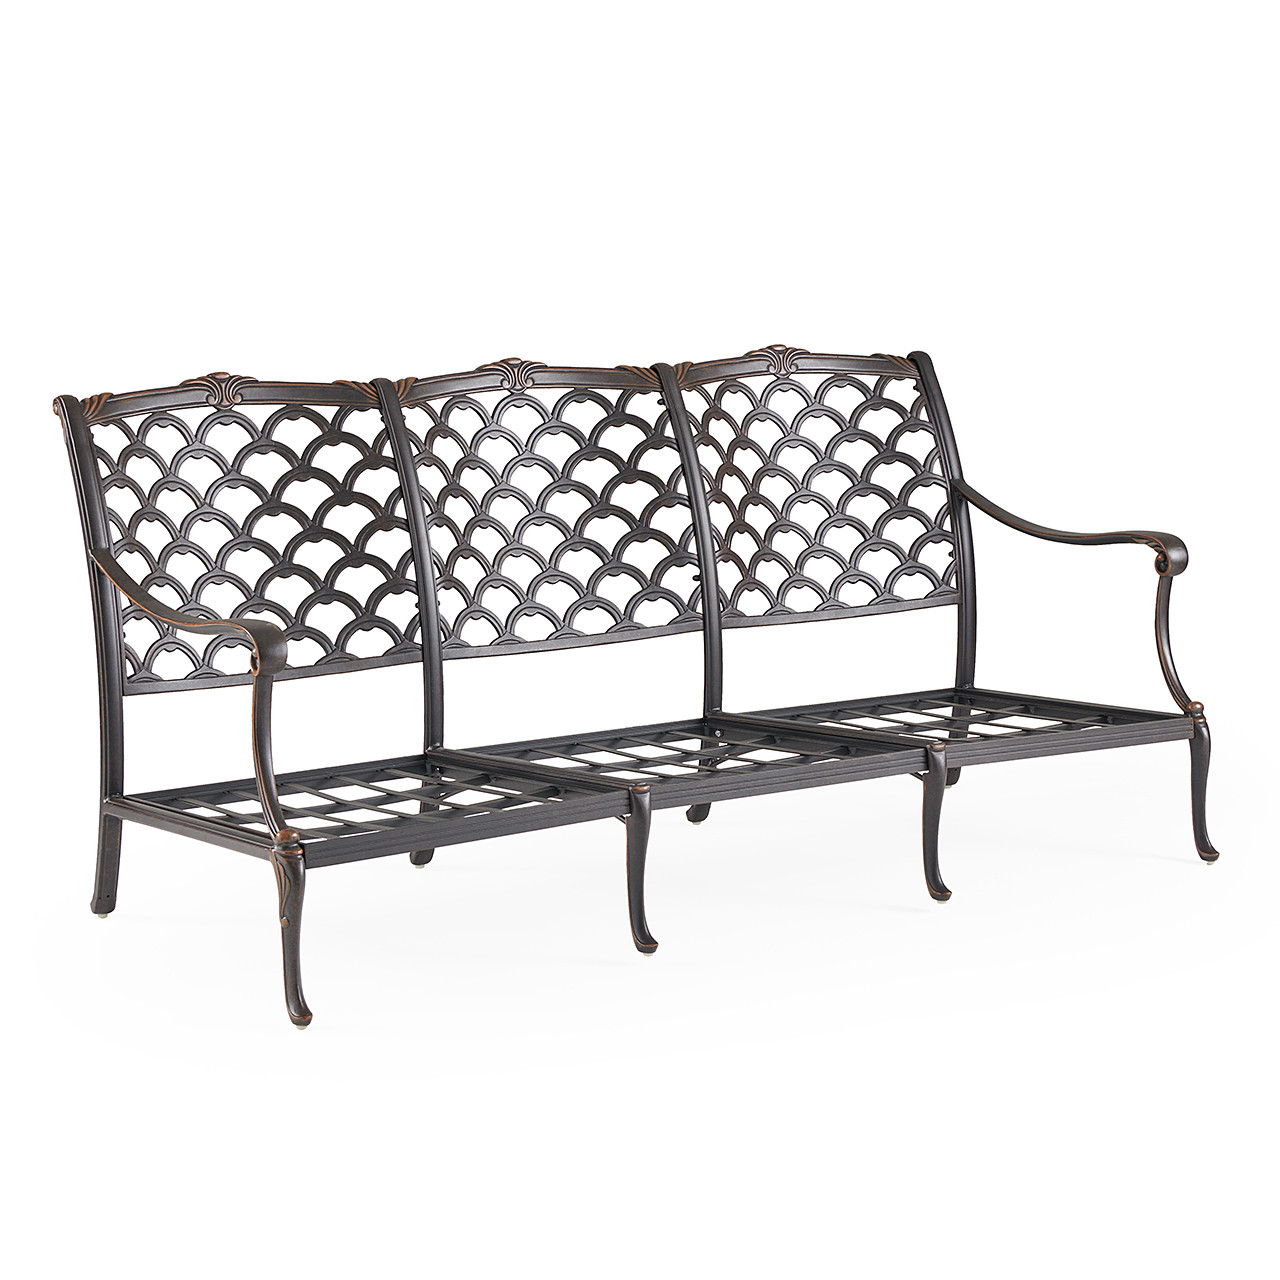 Bordeaux Golden Bronze Cast Aluminum with Cushions 4 Piece Sofa Group + 48 x 26 in. Coffee Table